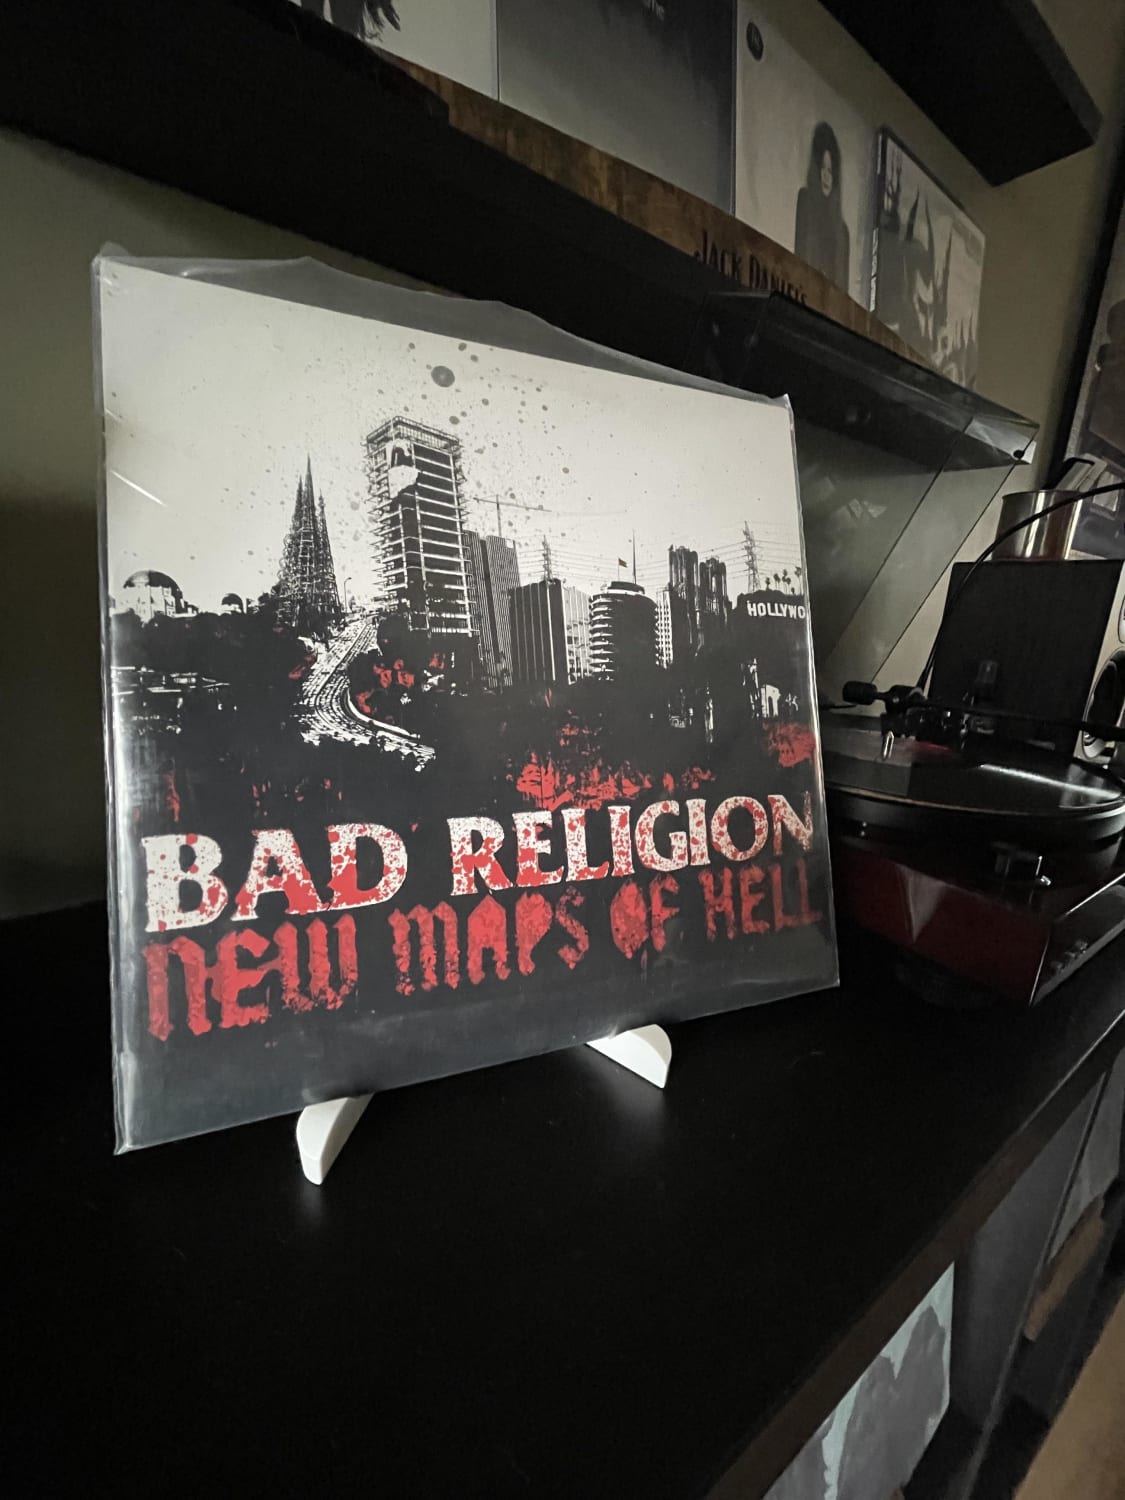 Taking a break from spinning Christmas music… Bad Religion “New Maps of Hell”